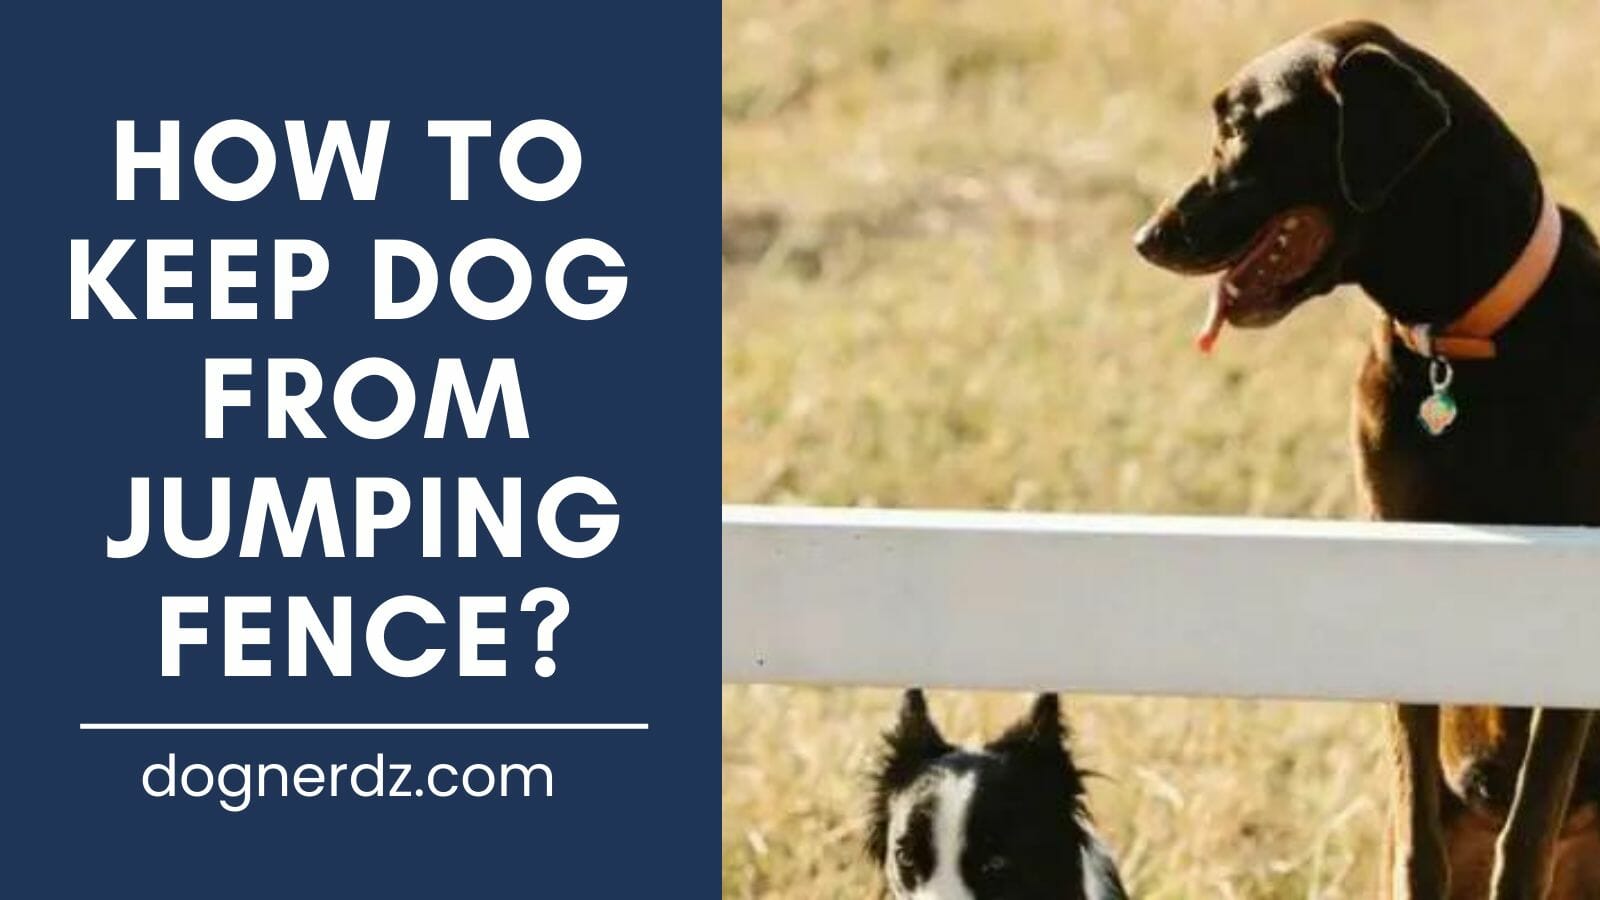 how to keep dog from jumping fence?